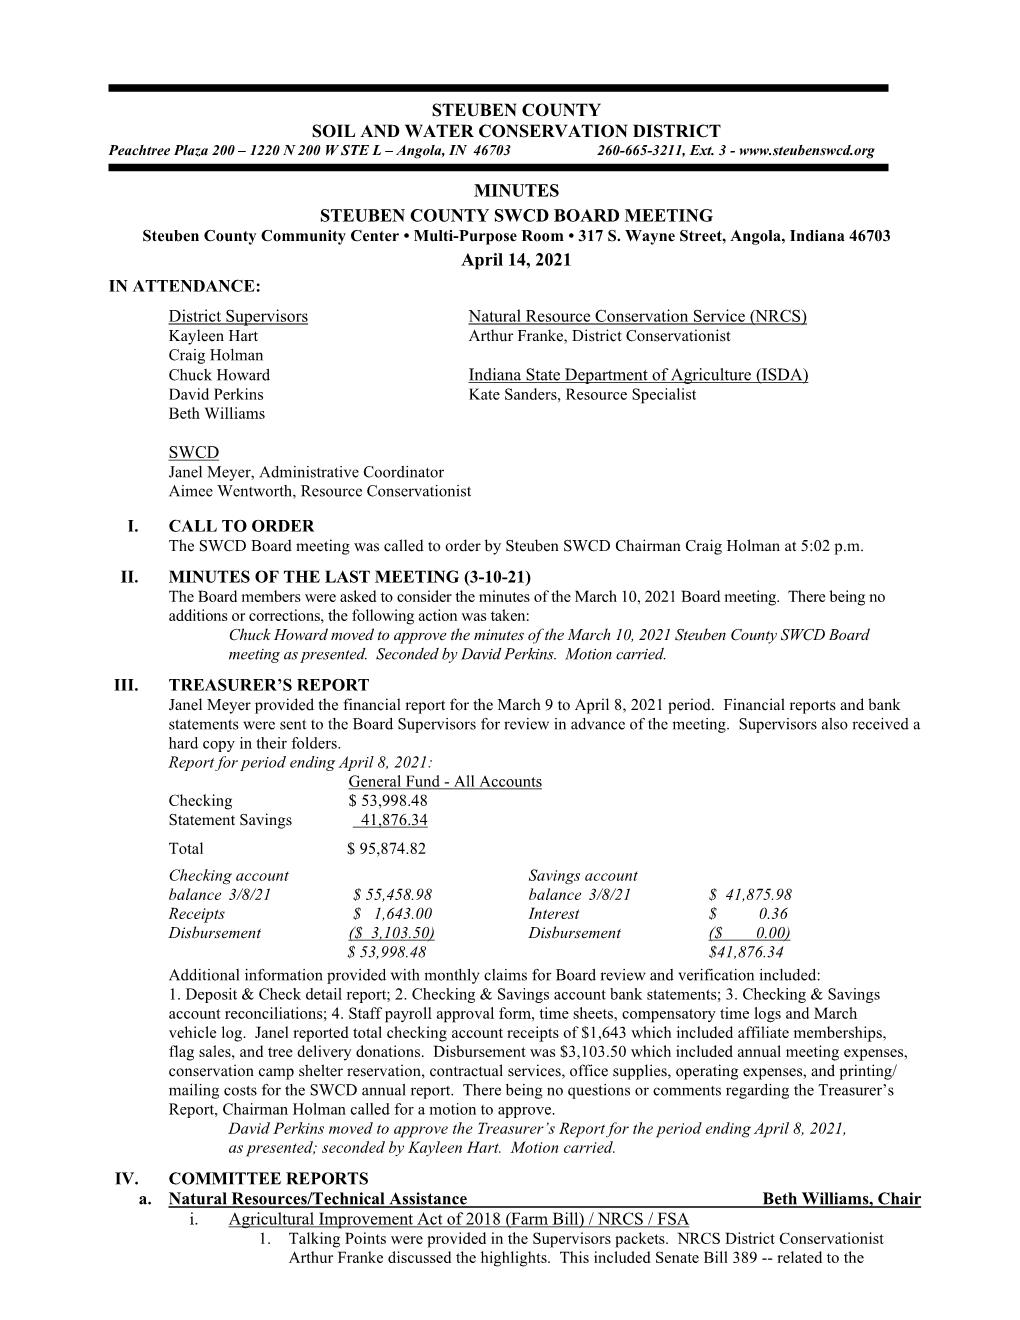 Steuben County SWCD 4-14-21 Board Meeting Minutes